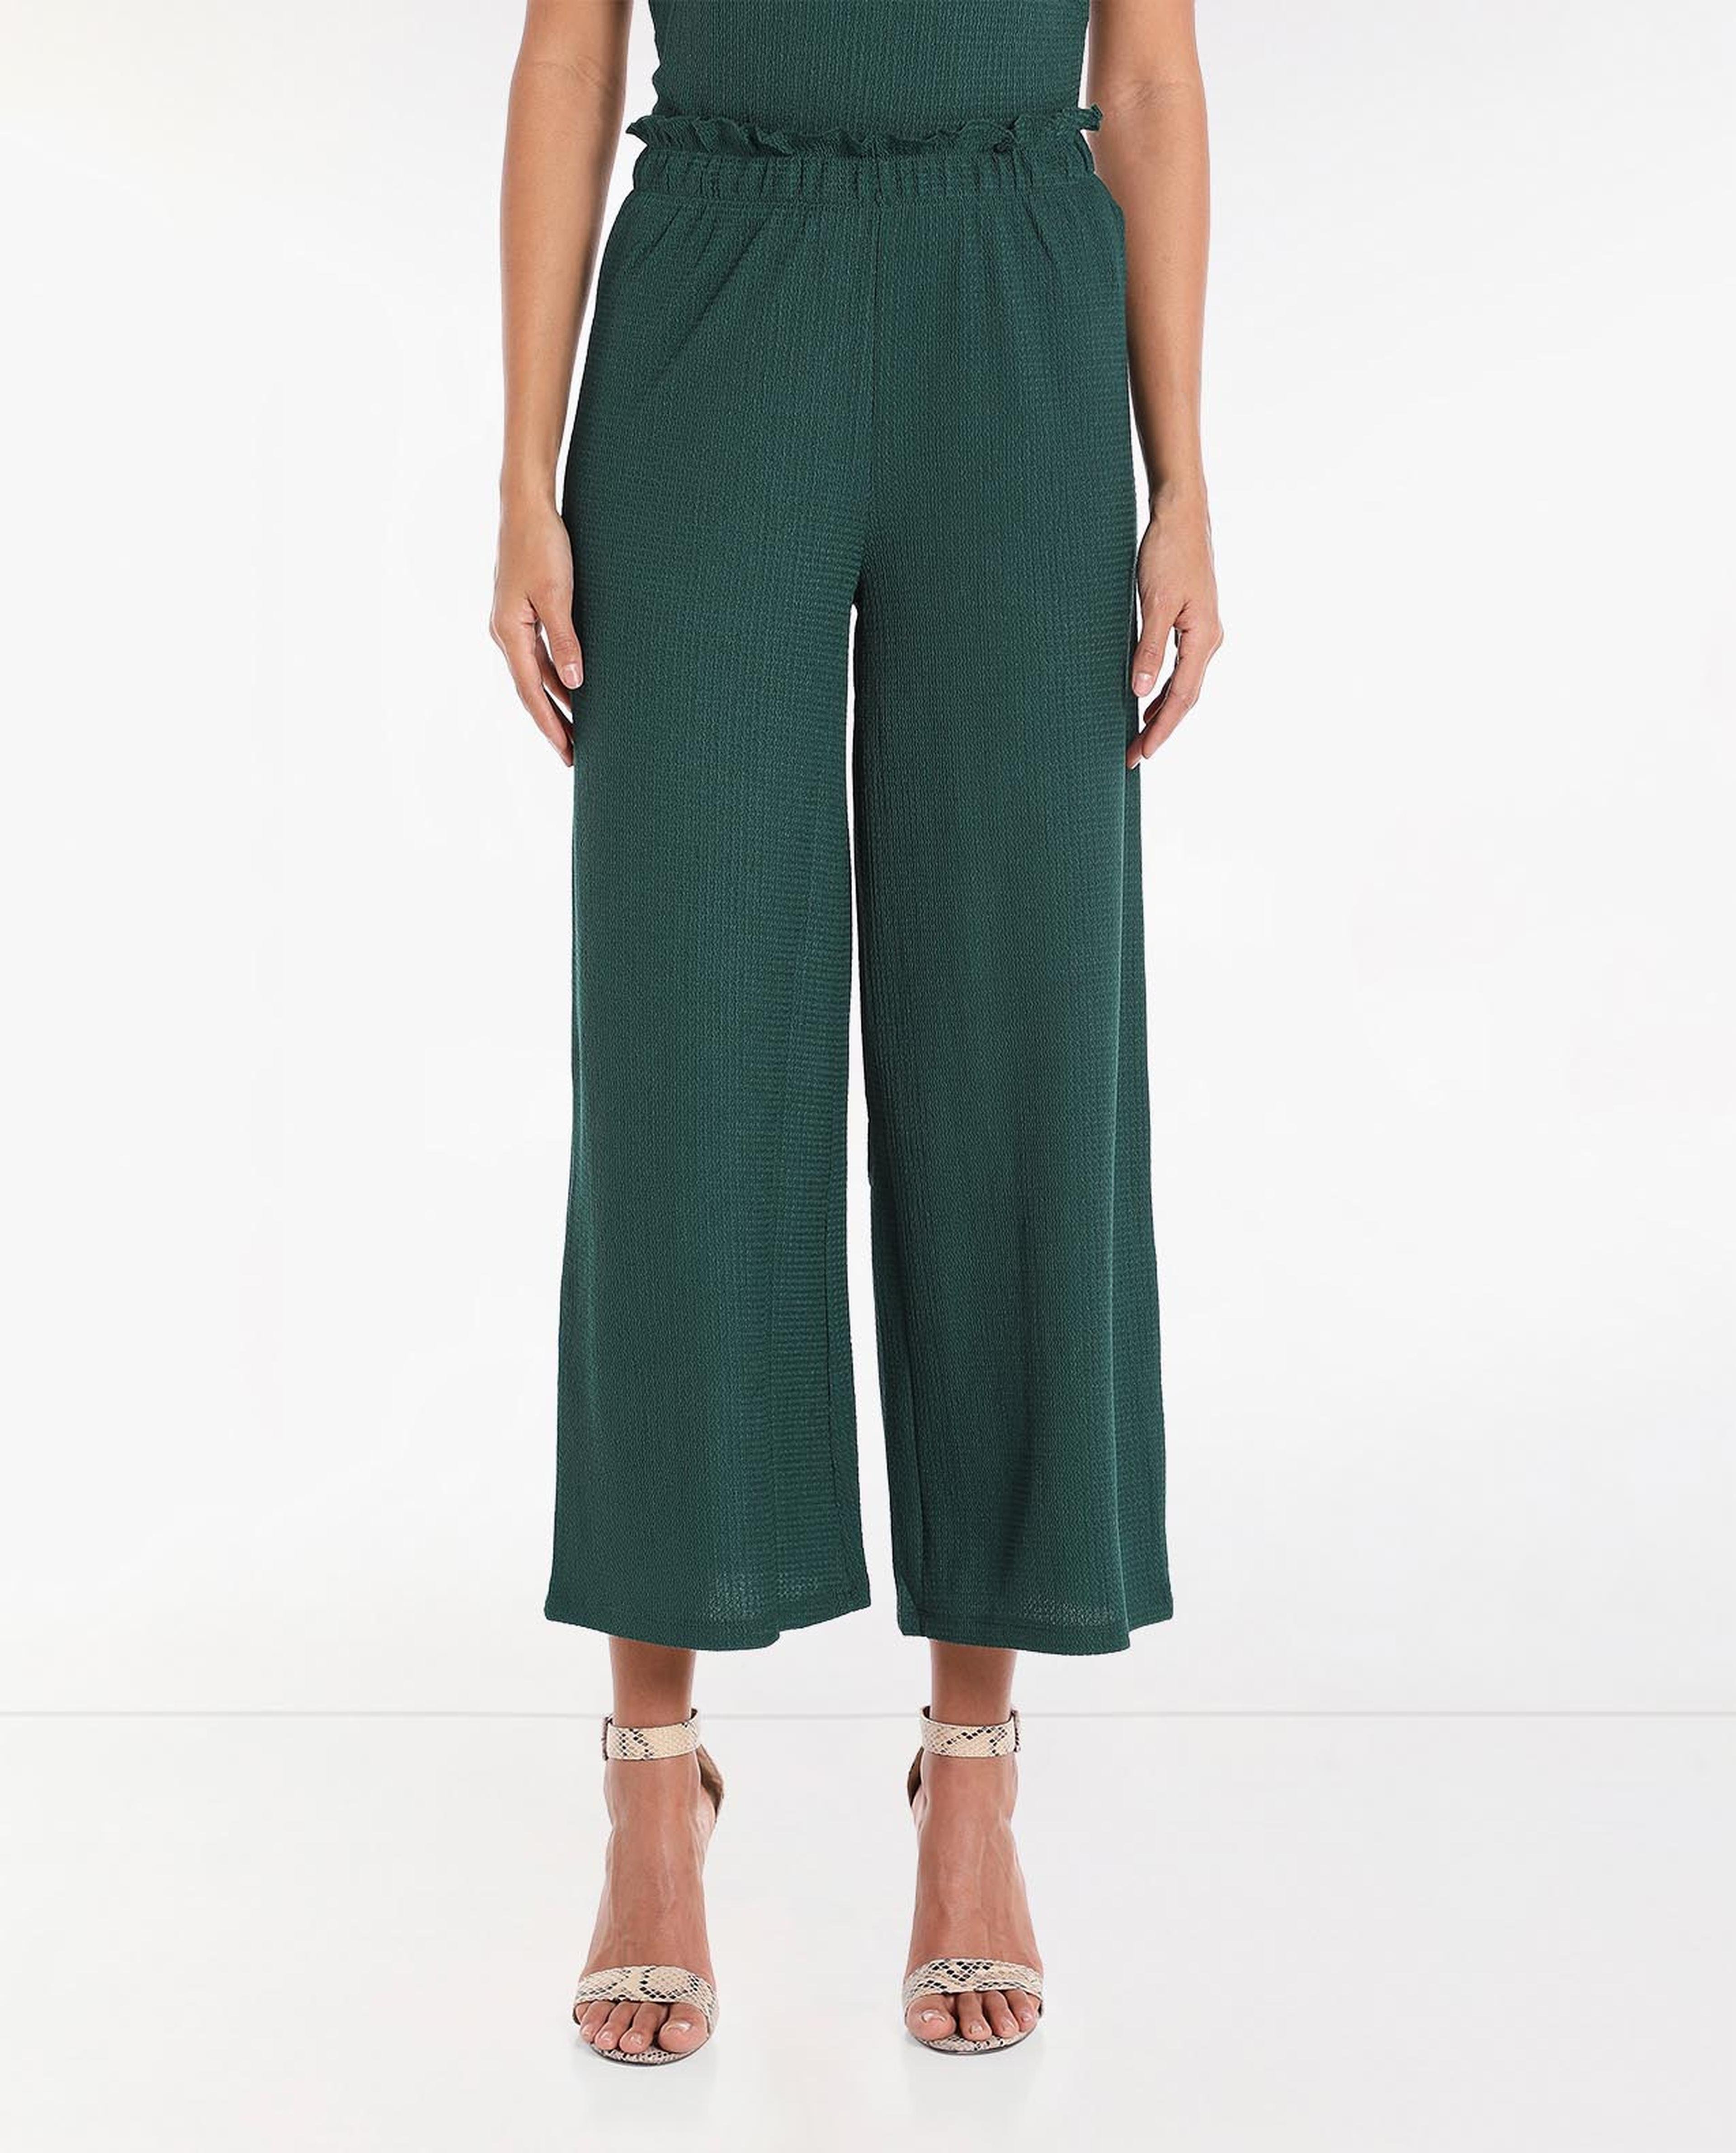 Solid Mid-Rise Culottes with Slip-On Closure